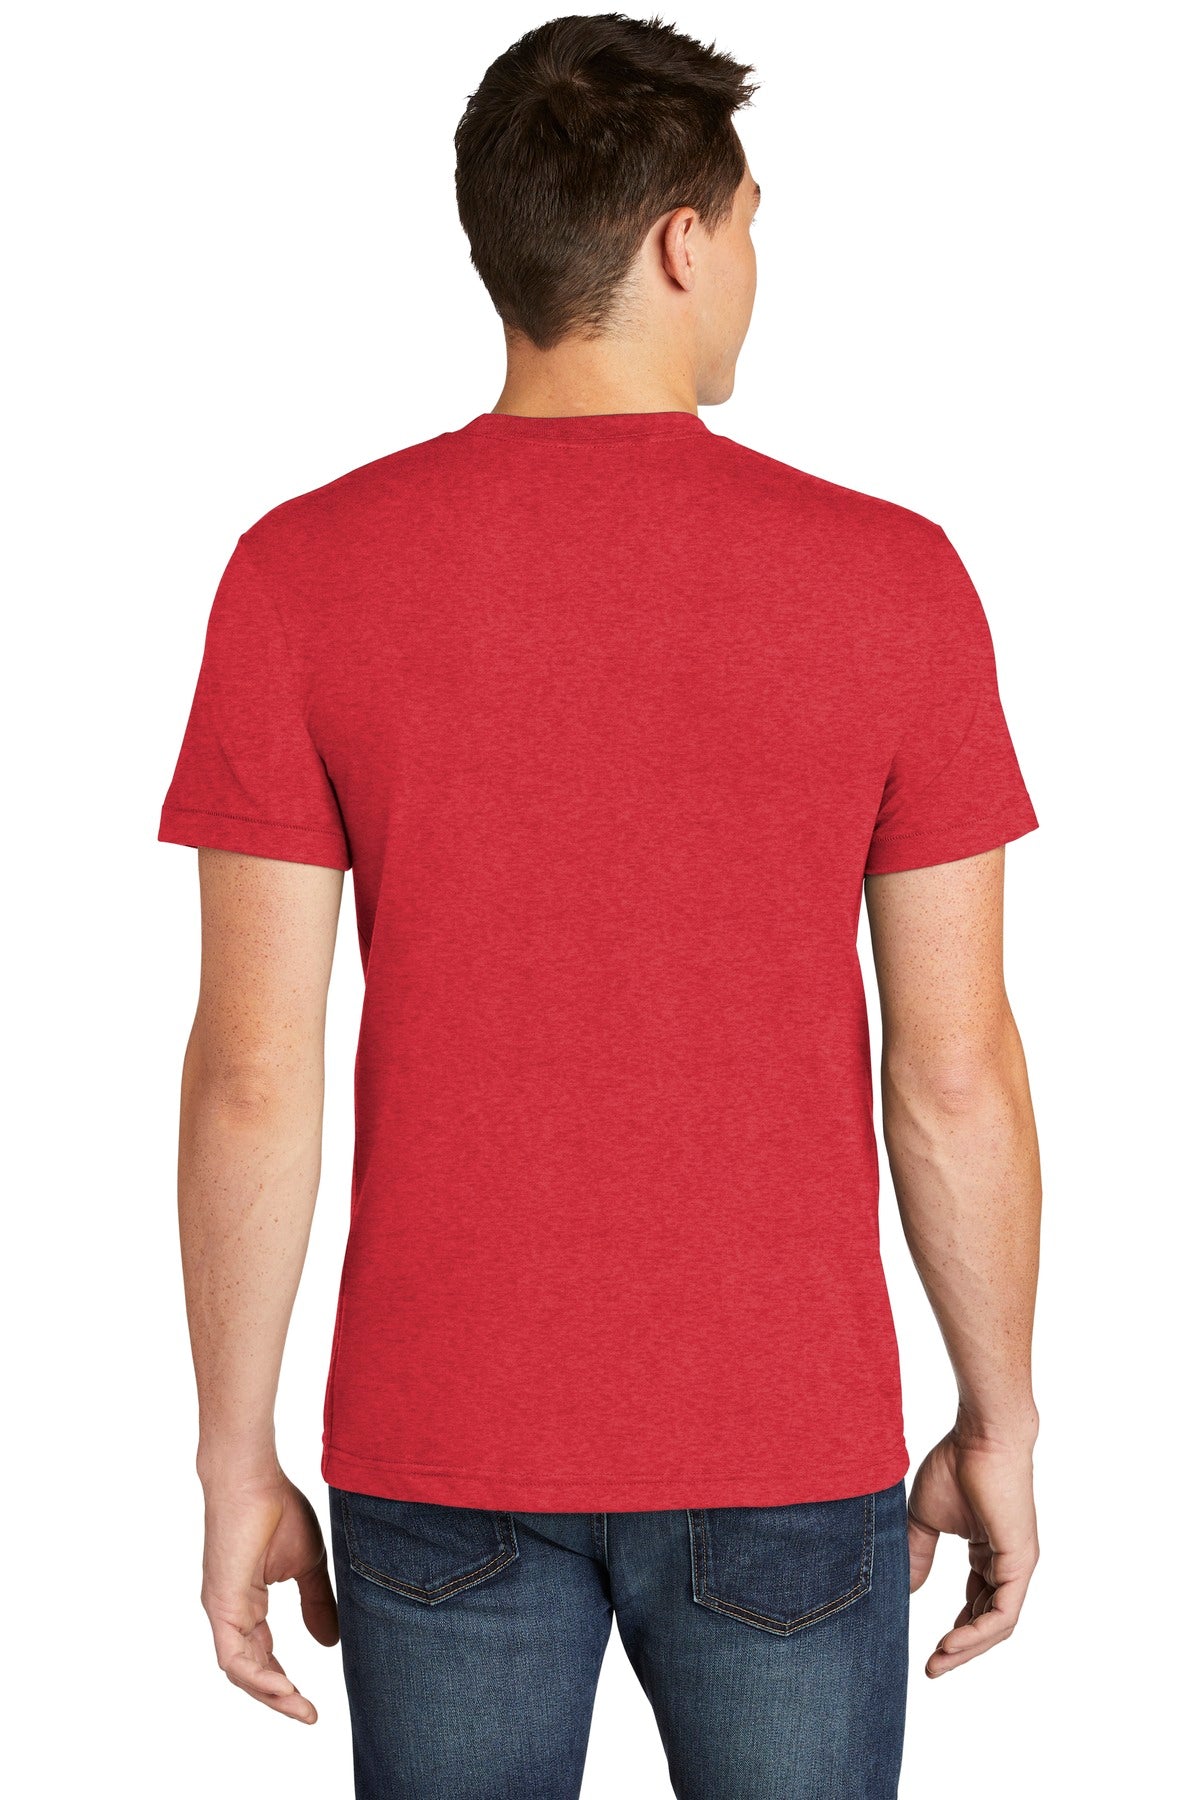 American Apparel ® Poly-Cotton T-Shirt. BB401W [Heather Red] - DFW Impression